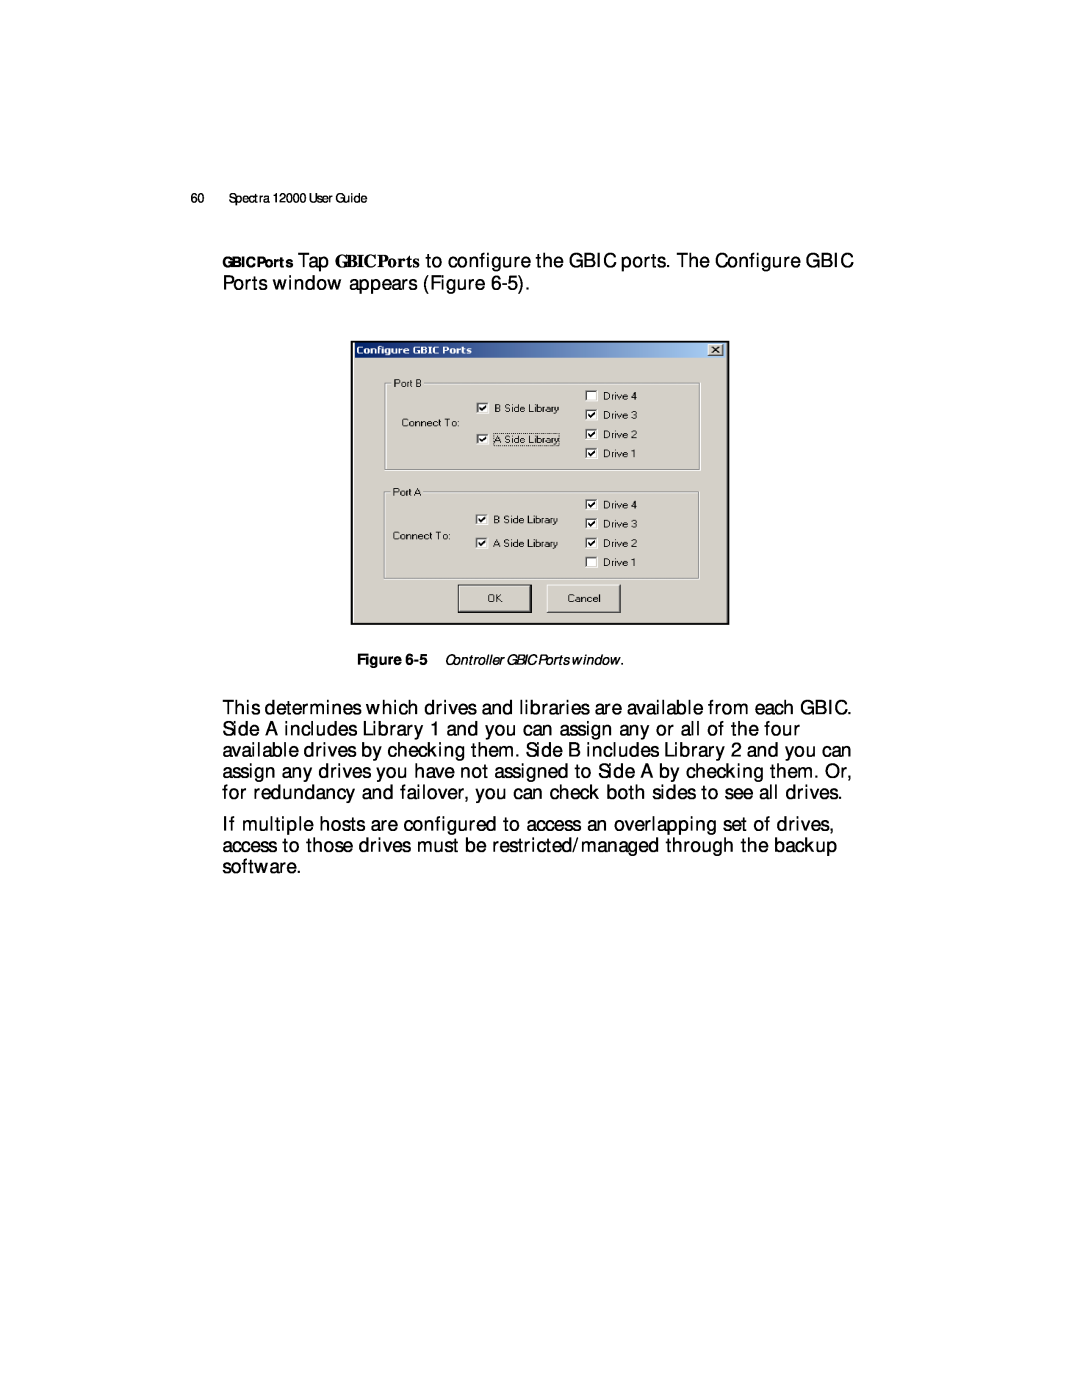 Spectra Logic manual 5 Controller GBIC Ports window, Spectra 12000 User Guide 